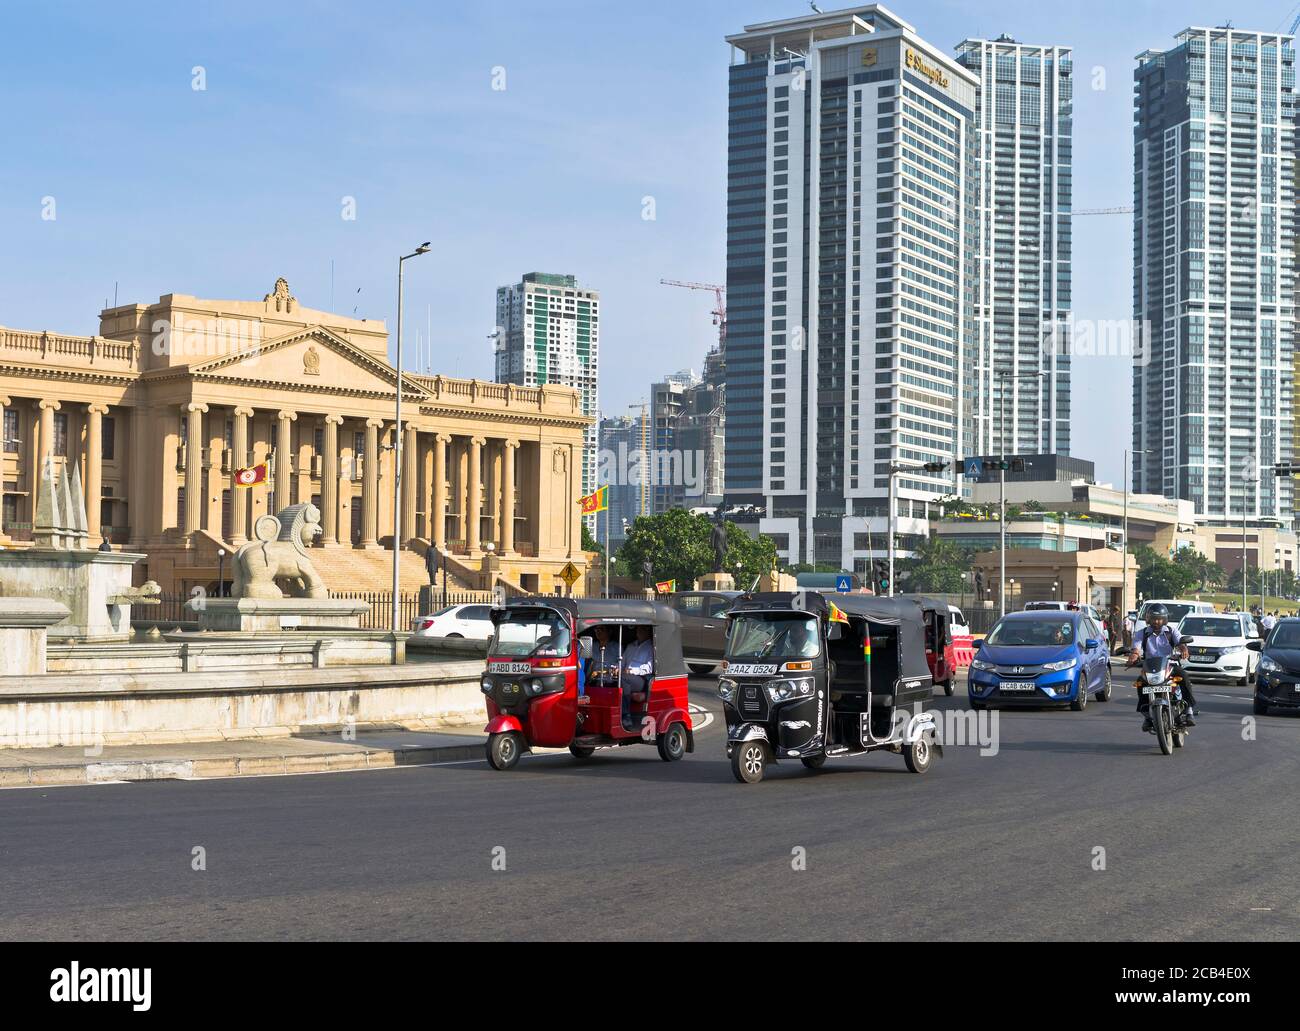 dh Galle face rond-point COLOMBO VILLE SRI LANKA Cars Tuk Trafic de taxis tuk Old Parliament Building Banque D'Images